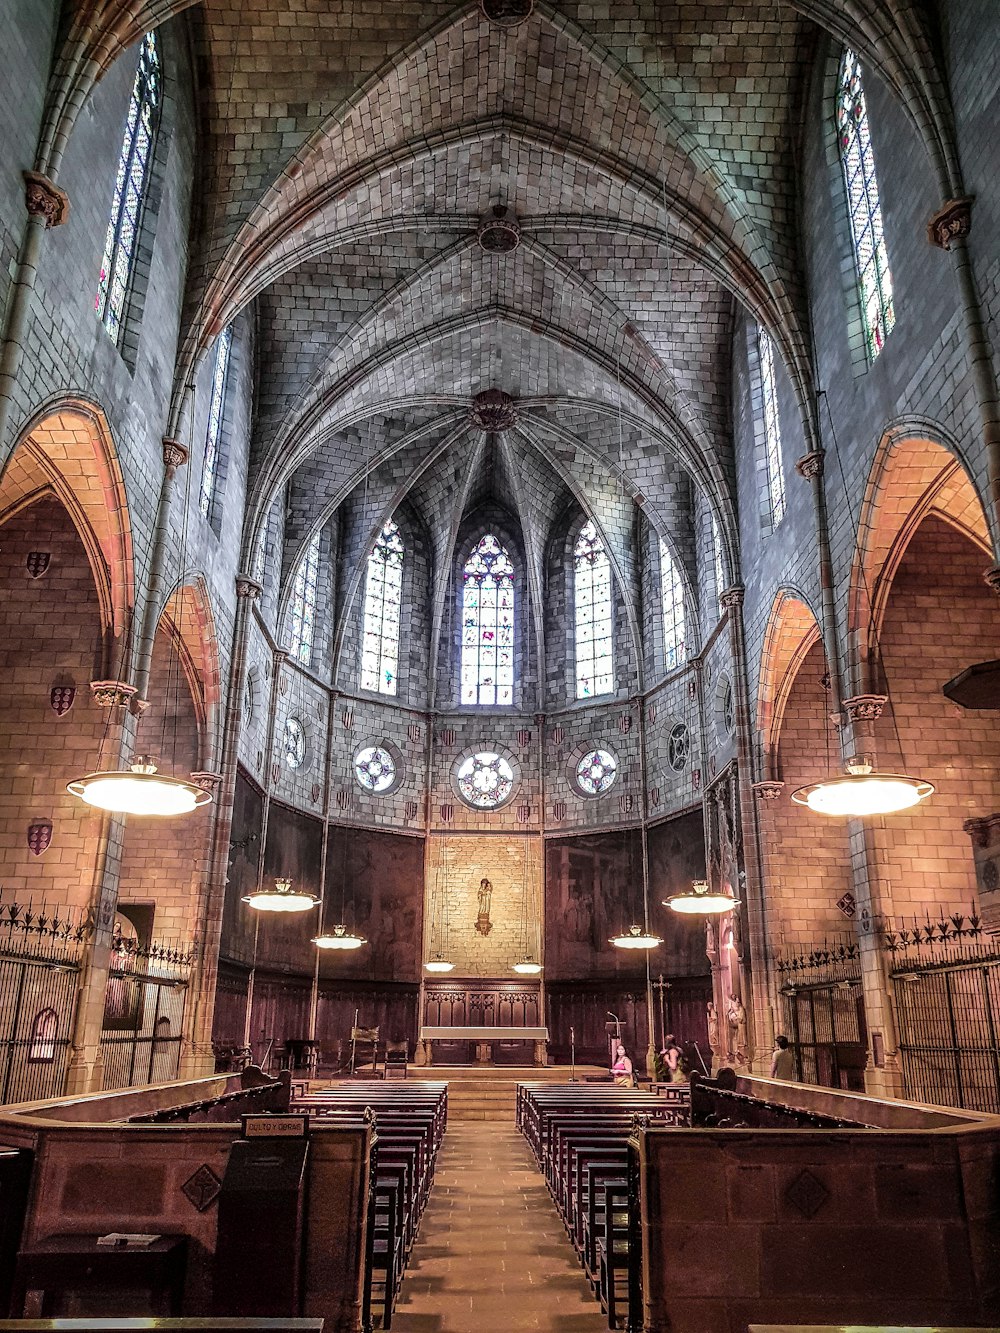 the inside of a church with pews and stained glass windows